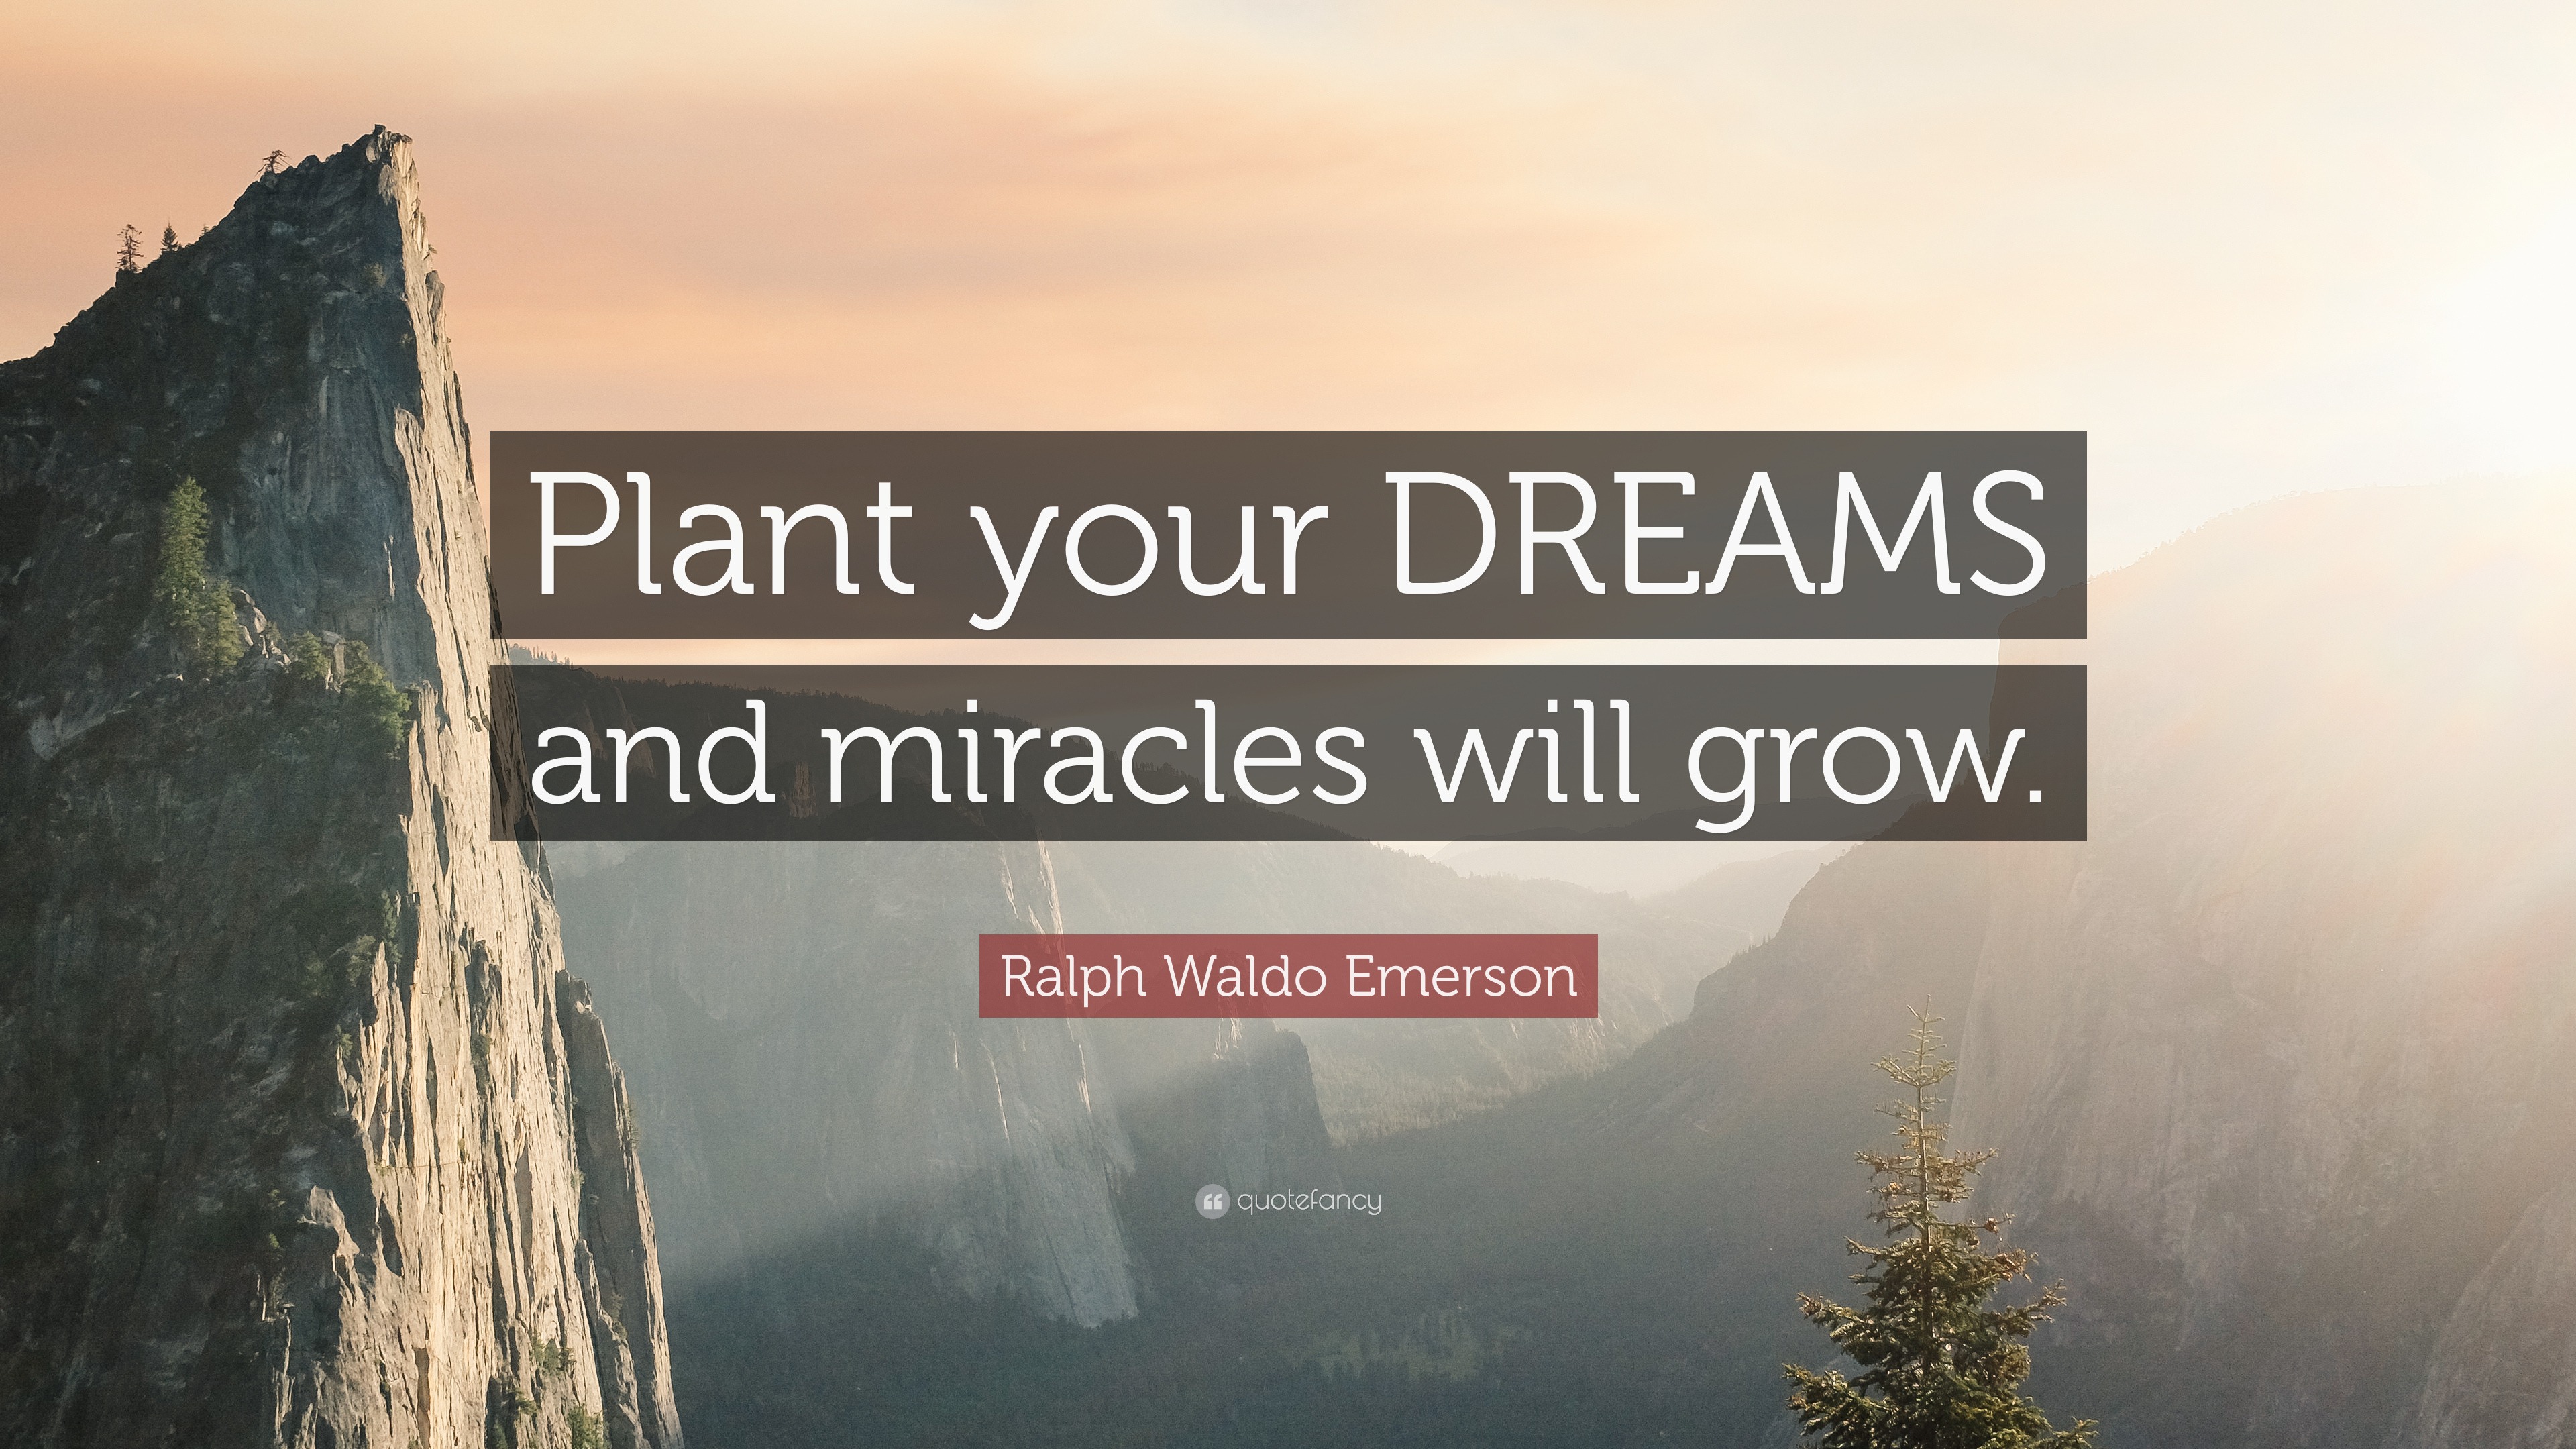 Ralph Waldo Emerson Quote: “Plant your DREAMS and miracles will grow.”